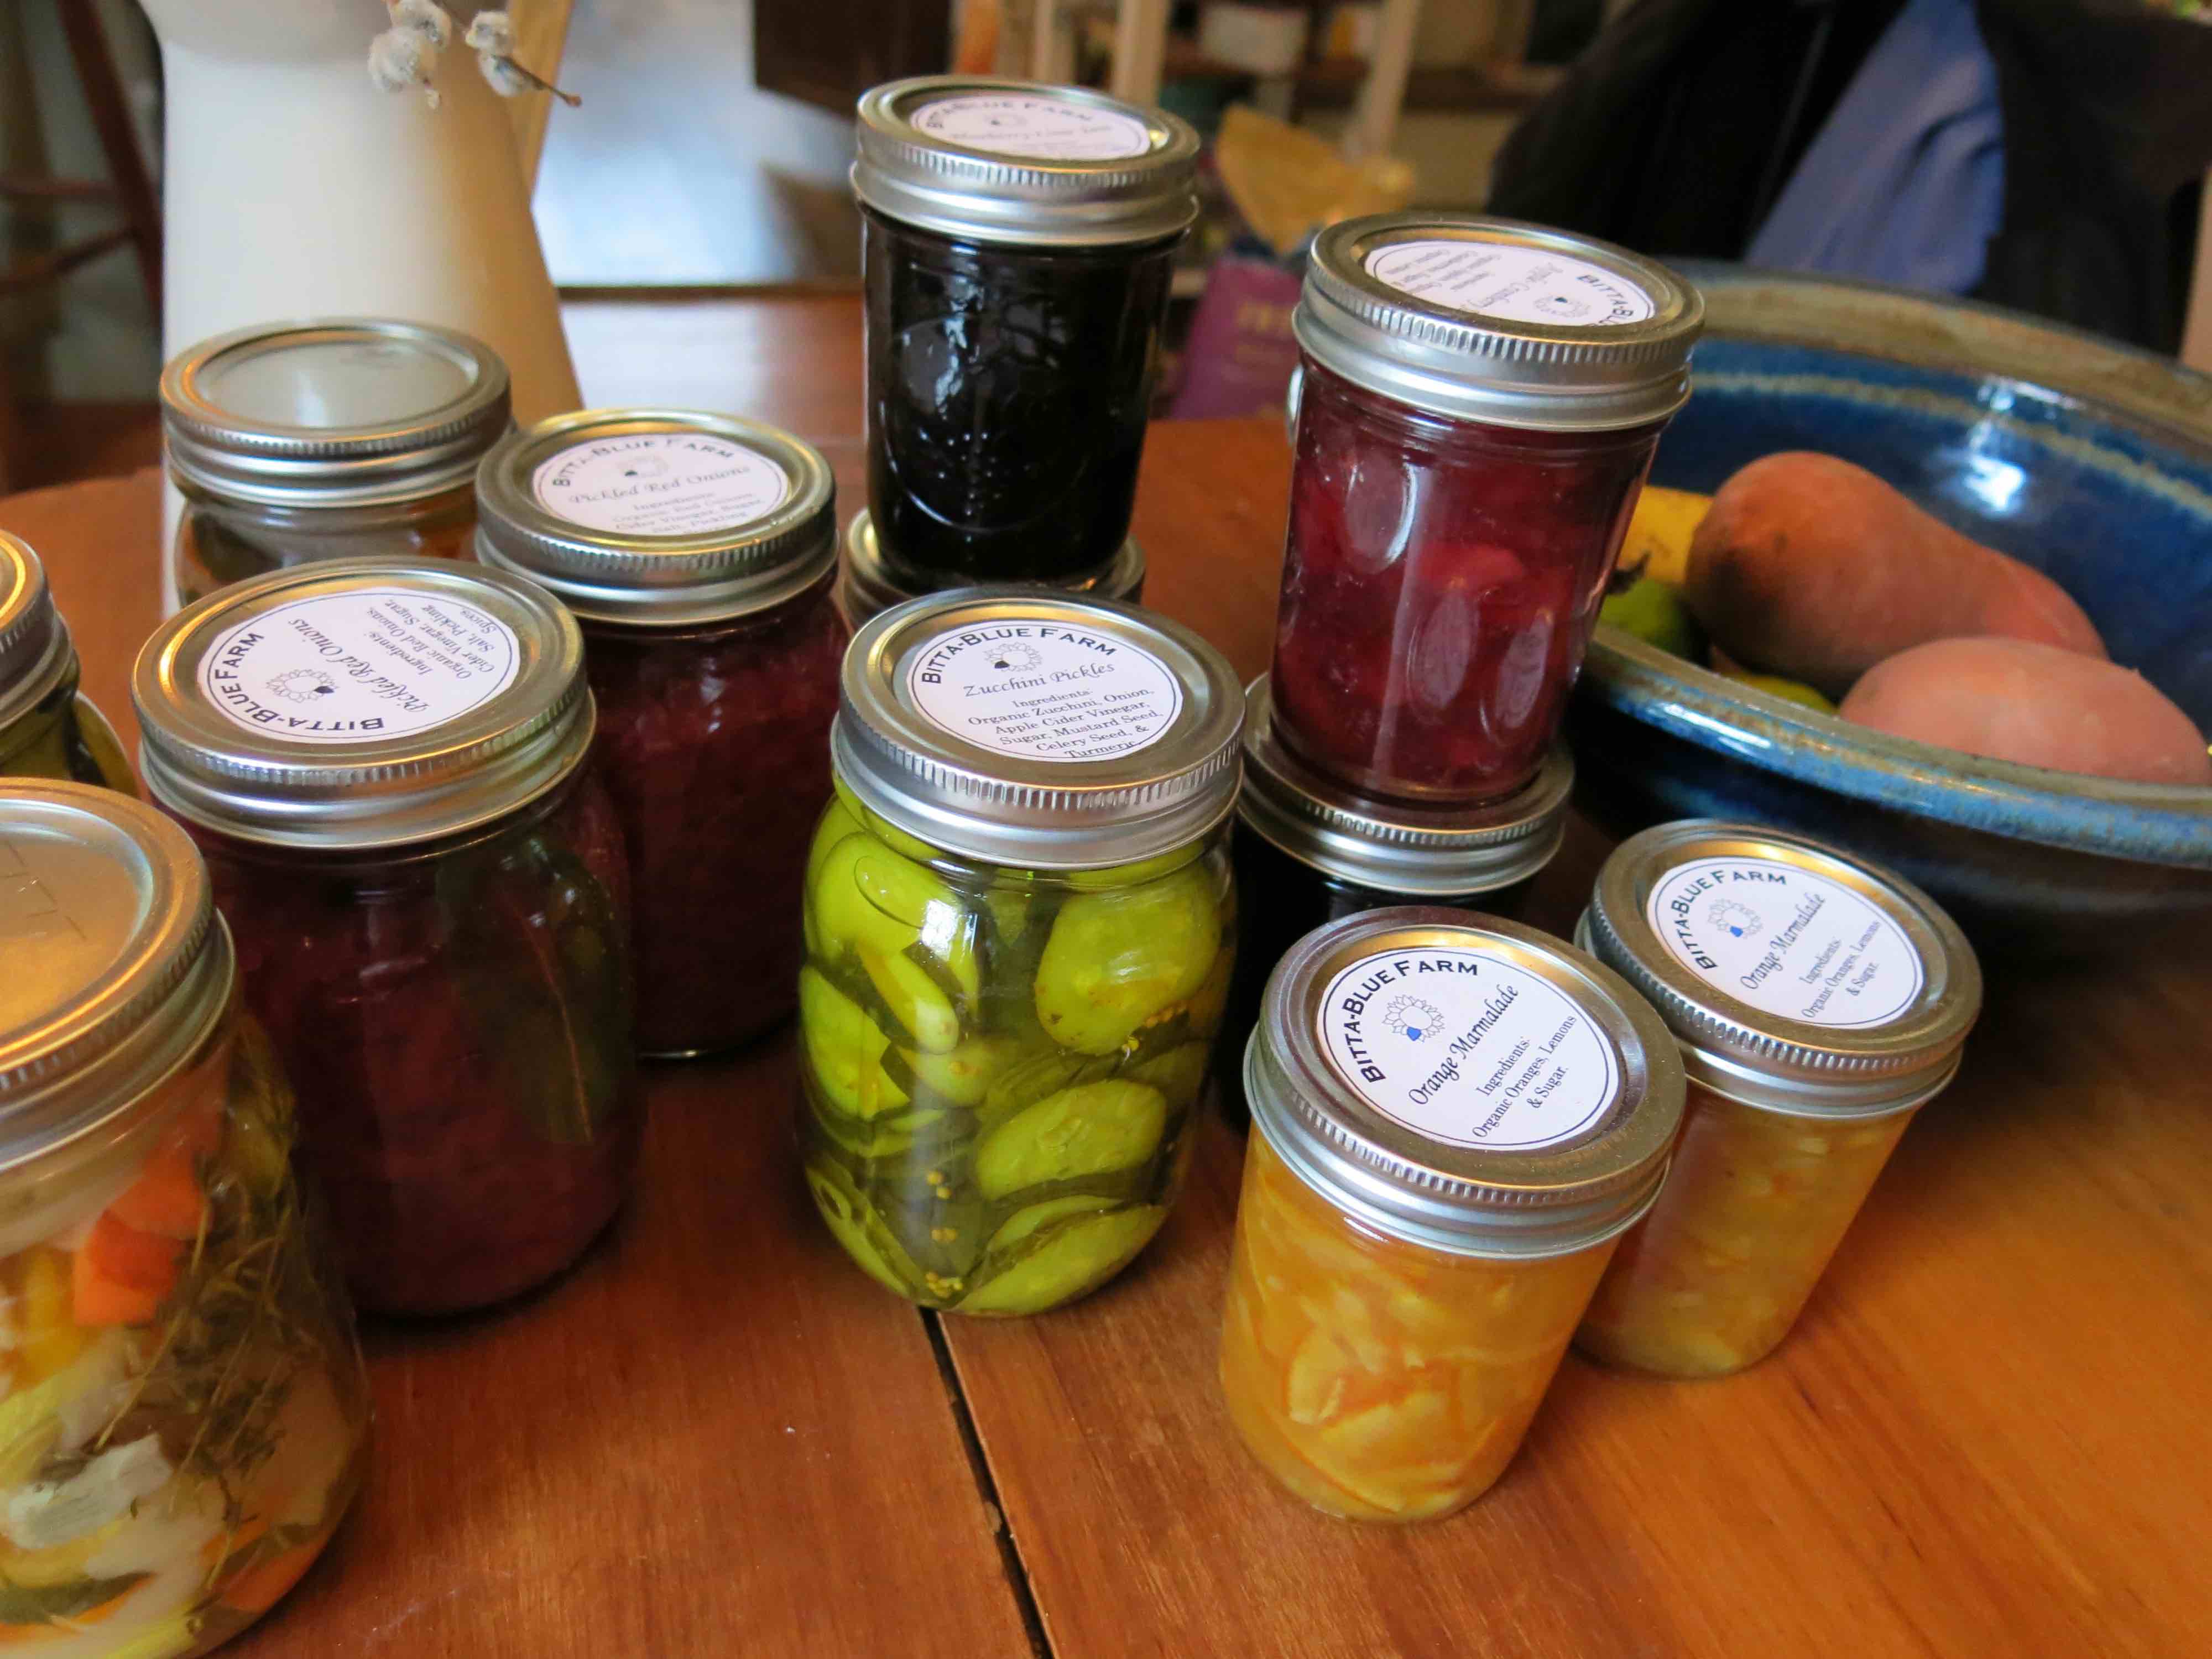 jars filled with jam and pickles